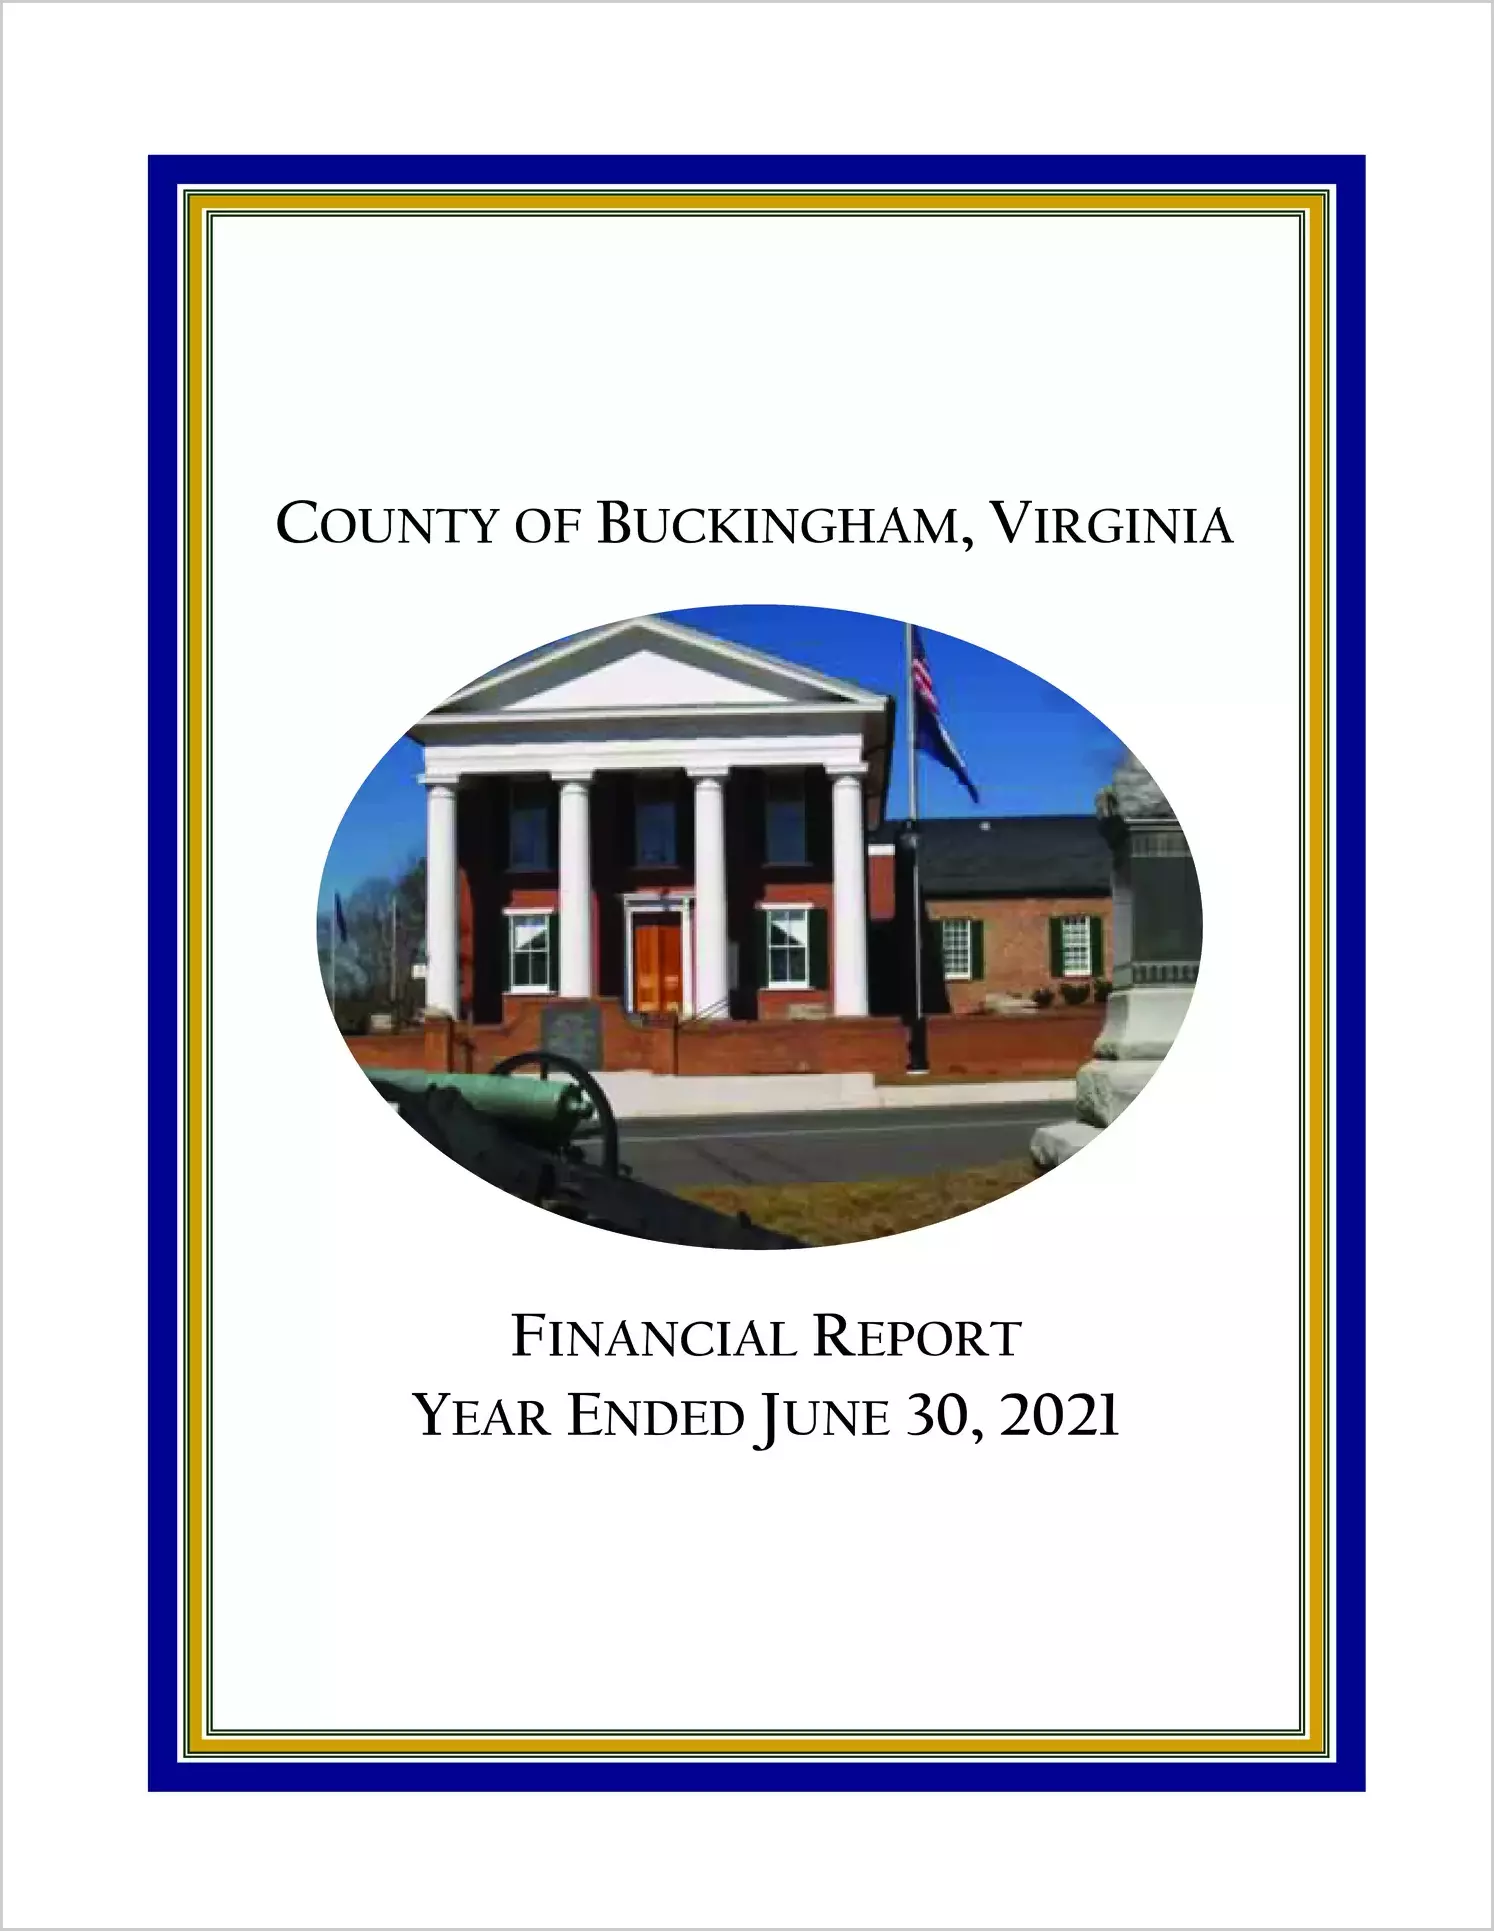 2021 Annual Financial Report for County of Buckingham